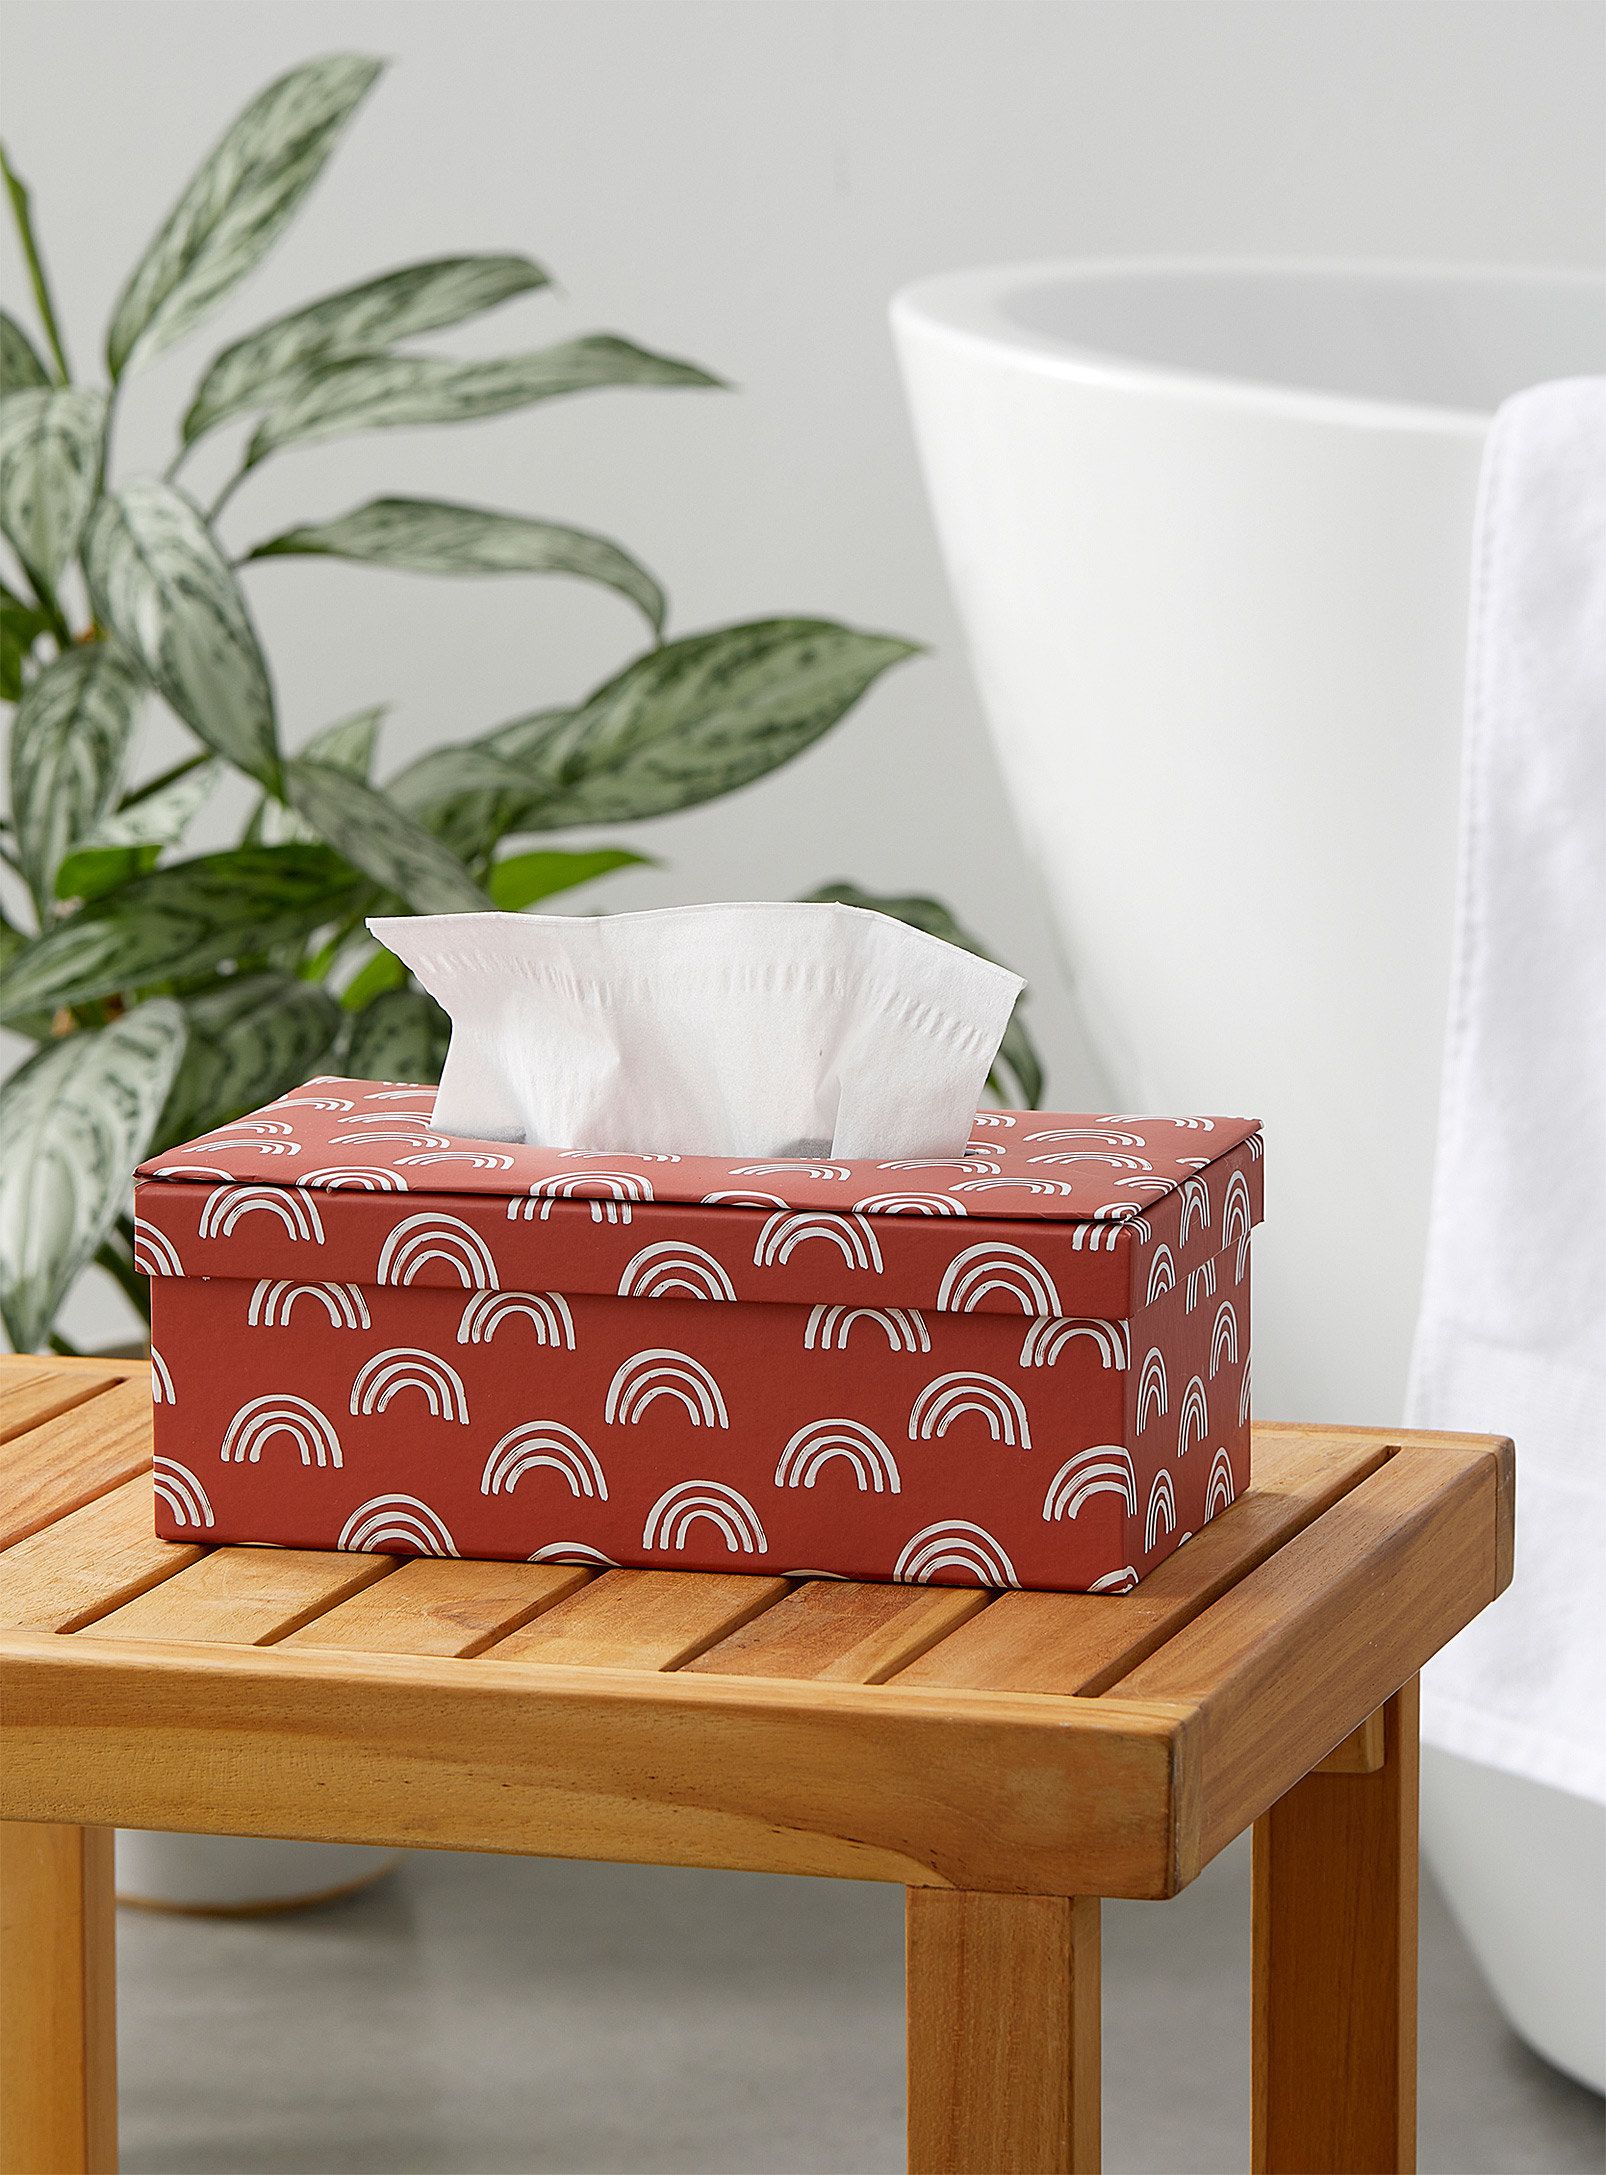 A tissue box on a wooden stool